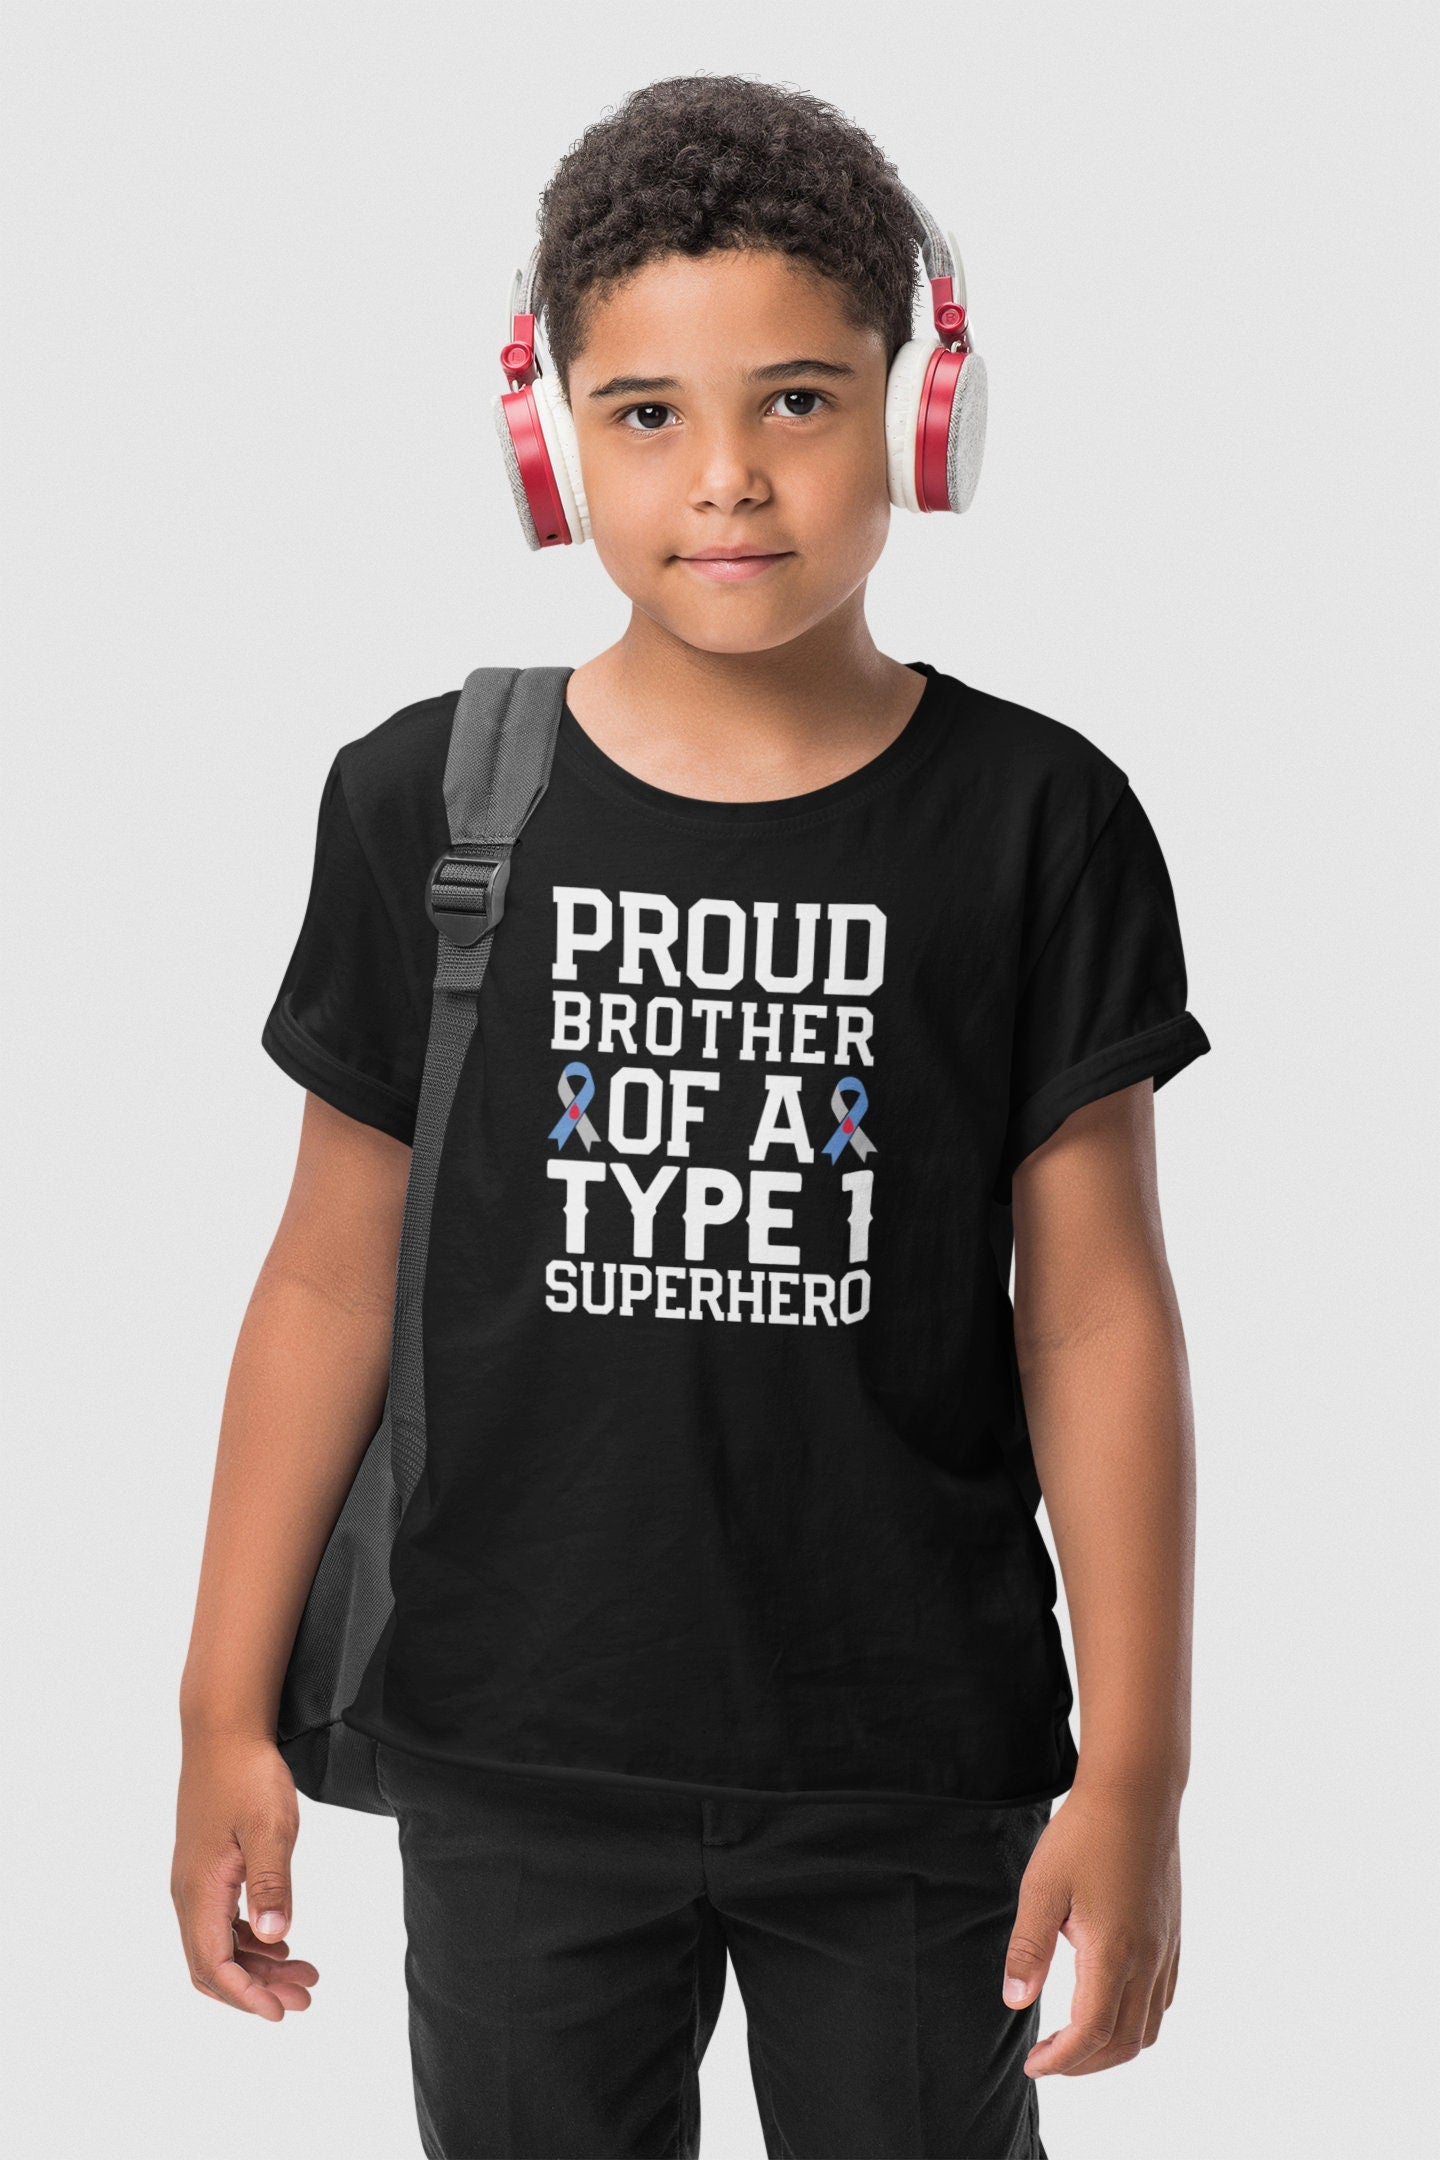 Proud Brother Of a Type 1 Superhero Type 1 Diabetes Shirt, T1D Fighter T1D Proud Brother